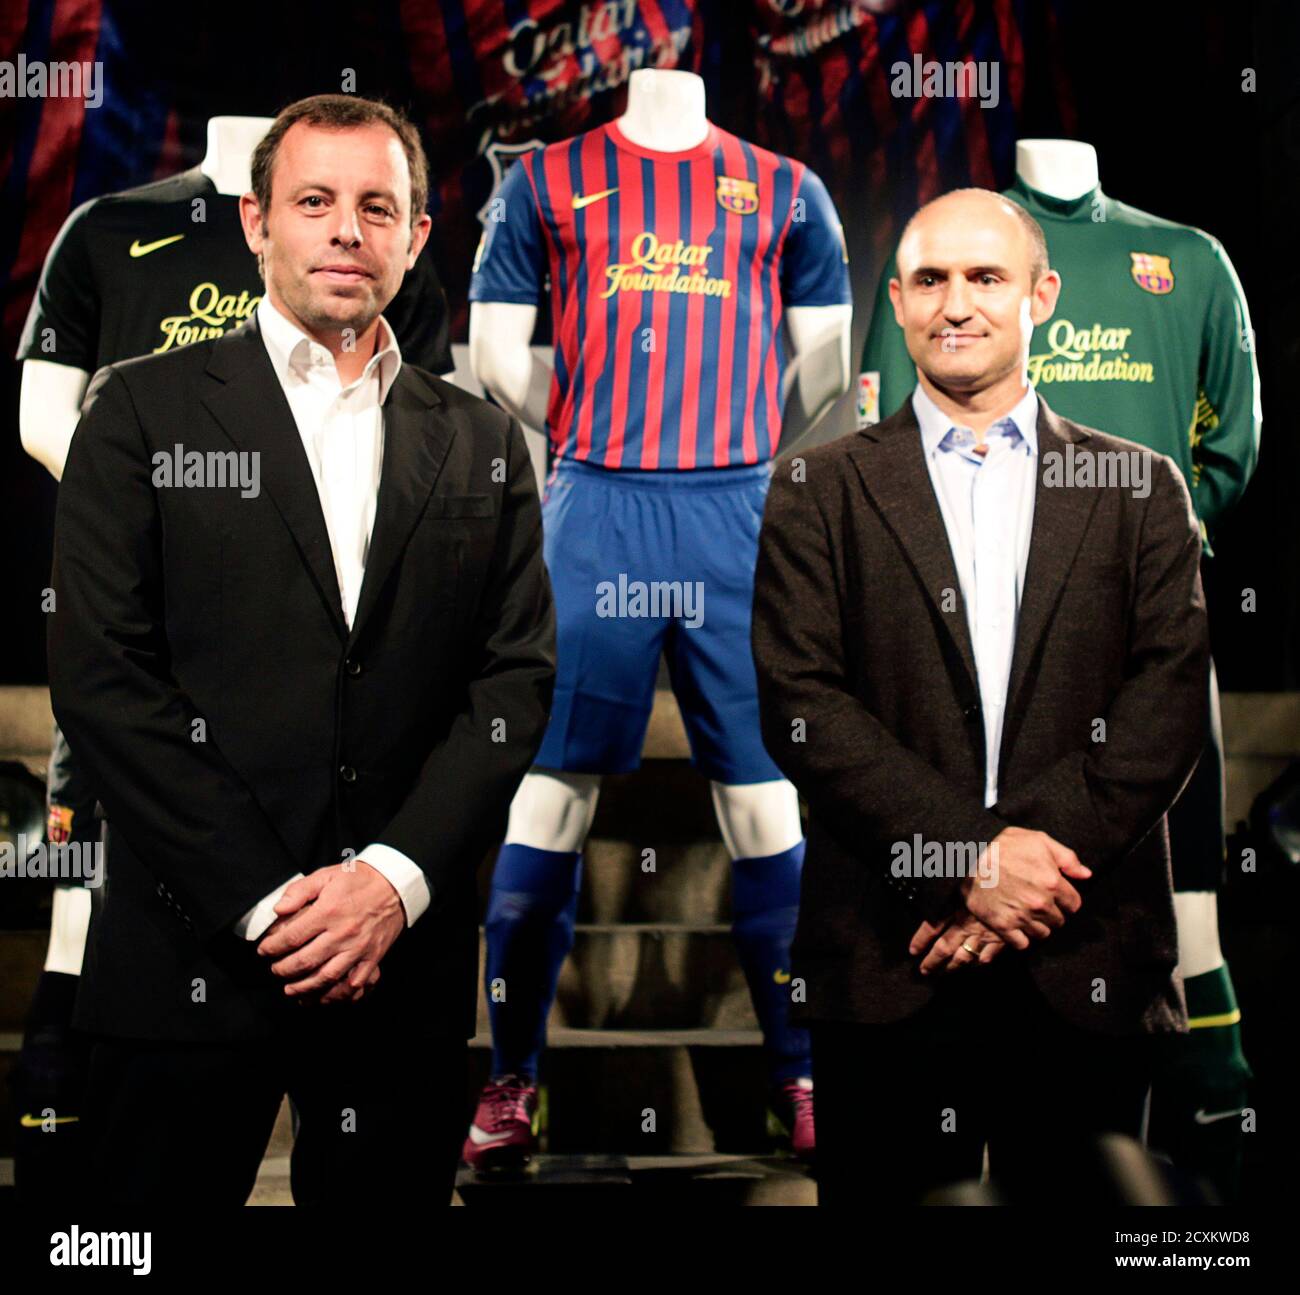 casamentero El camarero protestante Barcelona's President Sandro Rosell (L) and Nike's Iberia President Marcos  Garzo pose with the new Barcelona jerseys for the 2011-2012 season with the  Qatar Foundation logo during a presentation at Camp Nou